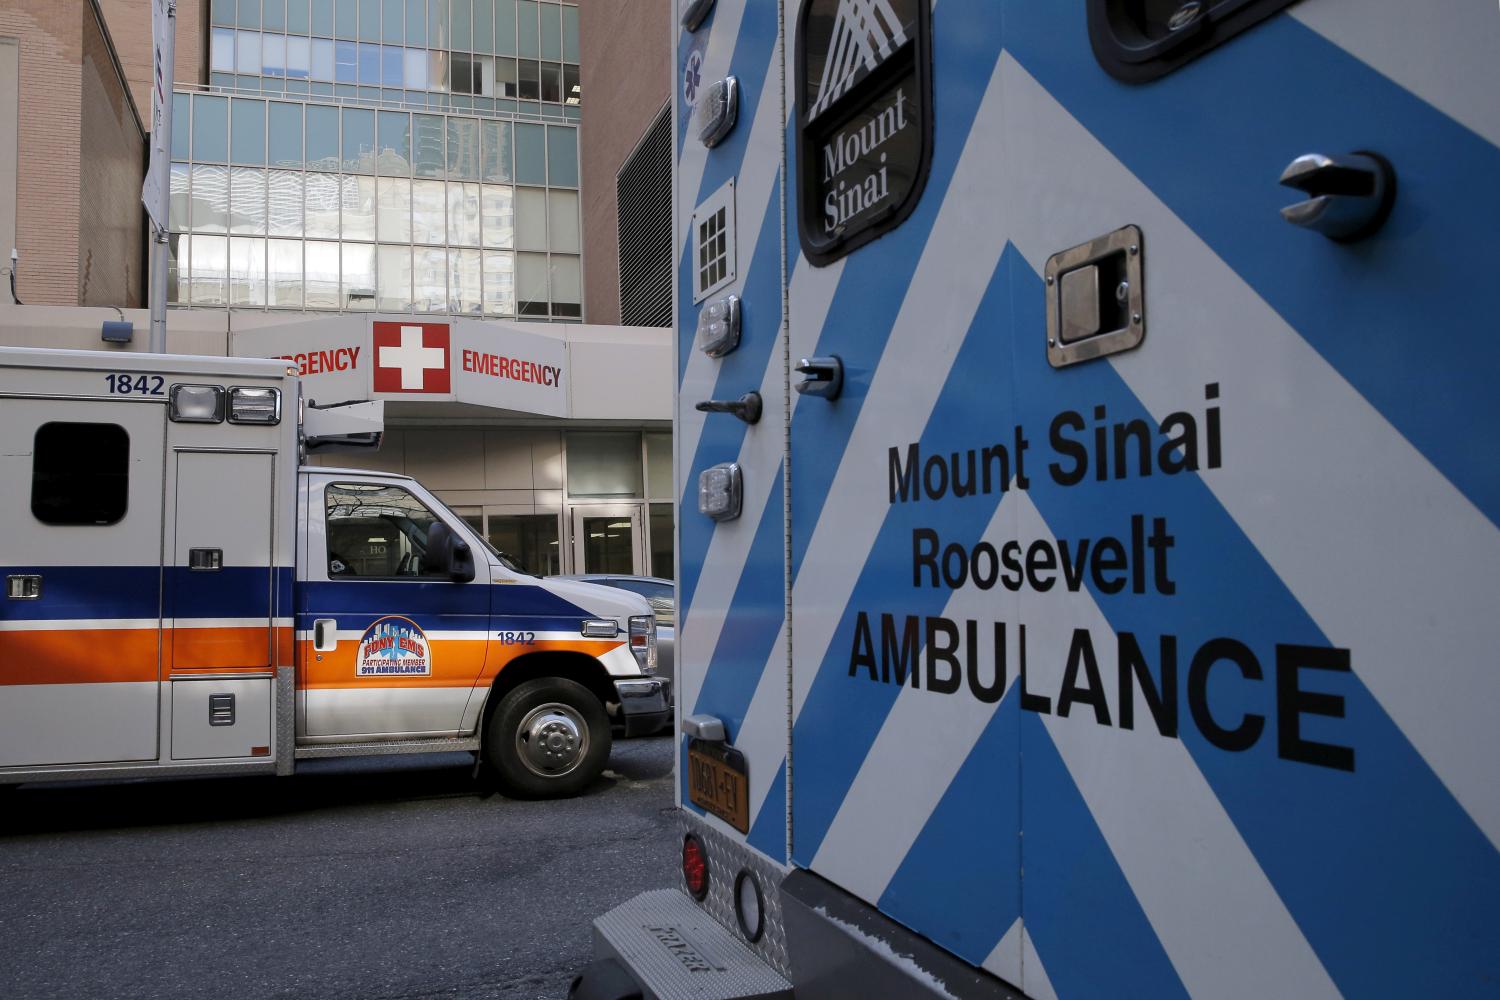 Ambulances are parked outside the emergency room entrance at Mount Sinai West Roosevelt Hospital in New York